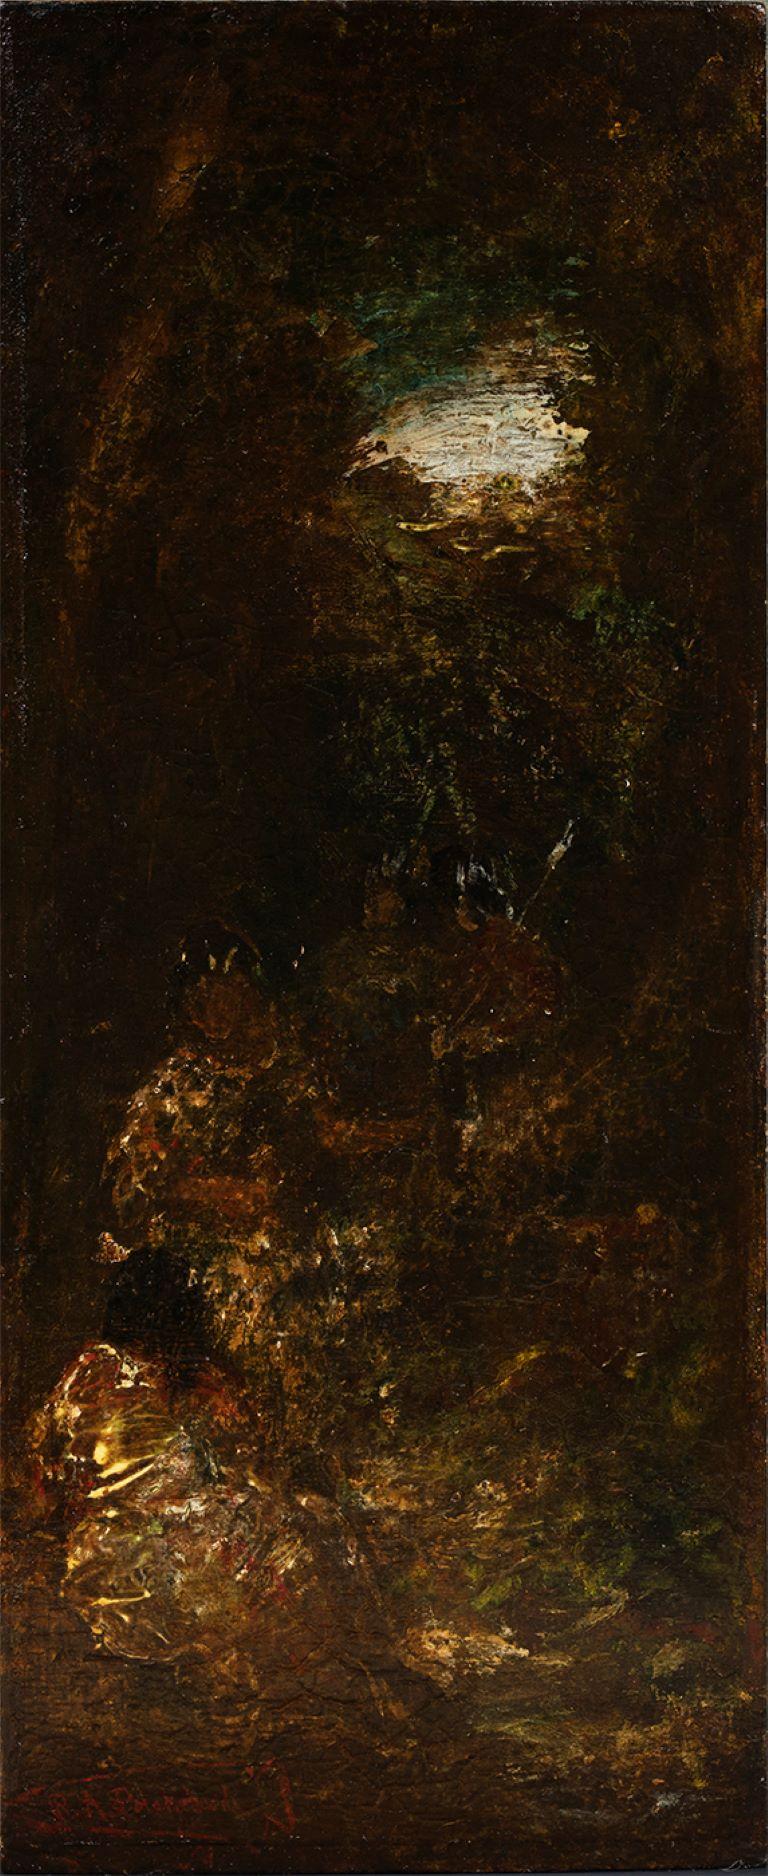 Ralph Albert Blakelock Landscape Painting - Four Native Americans in a Landscape